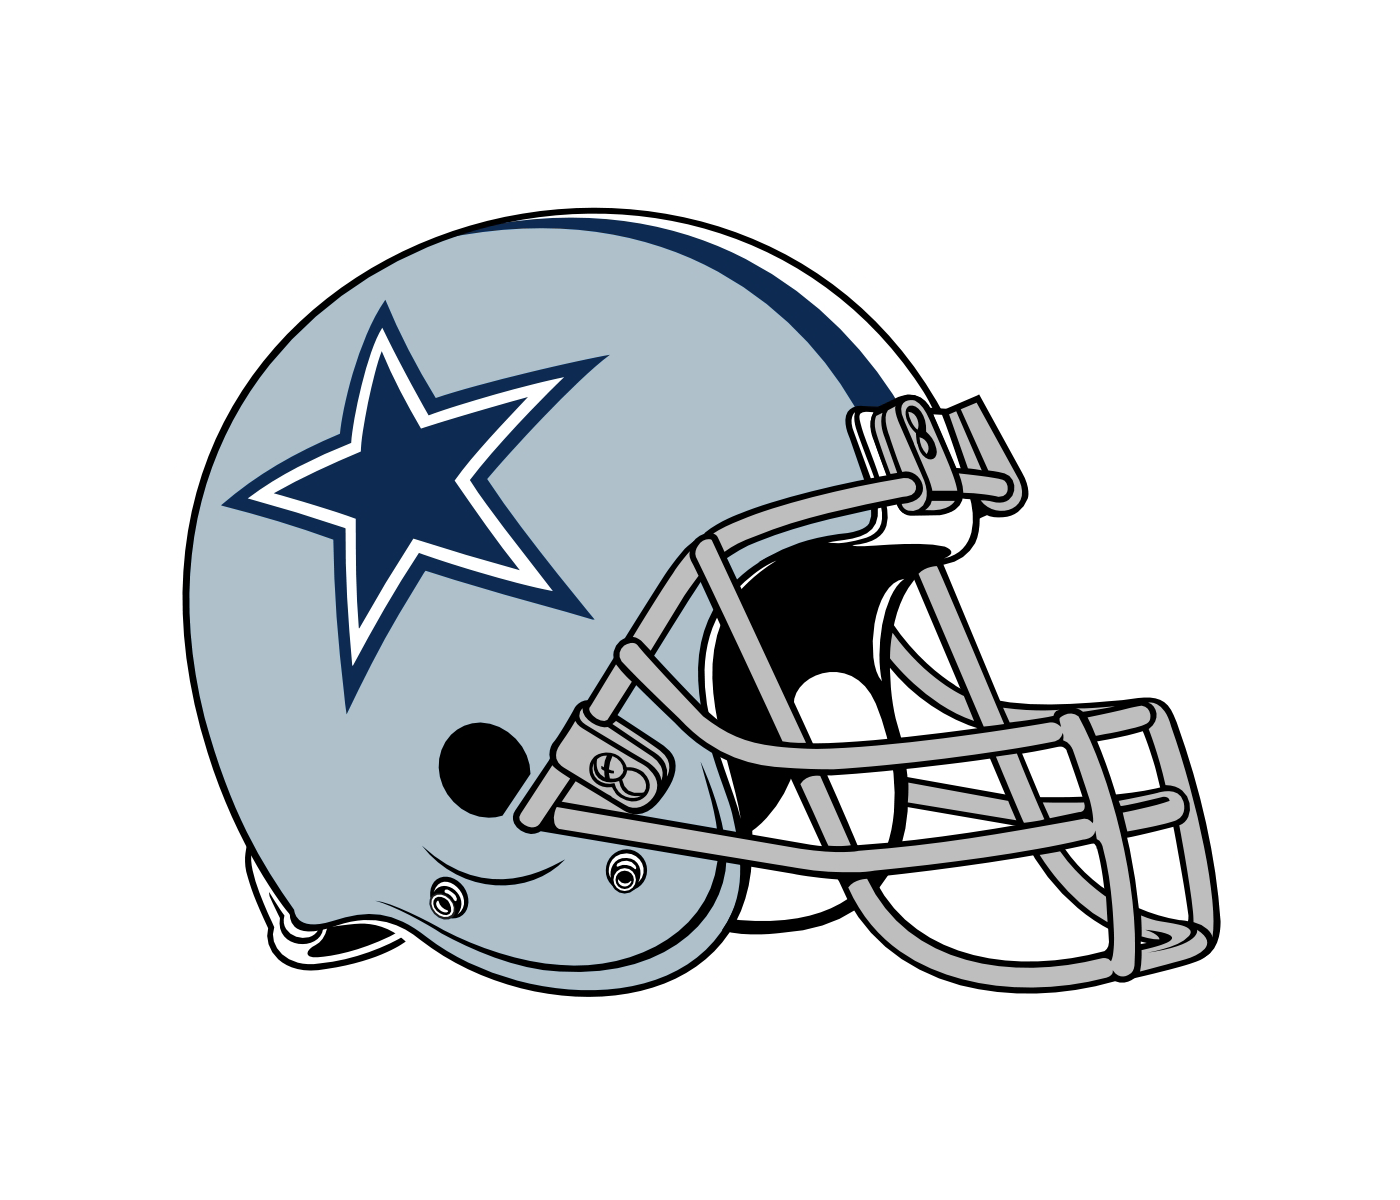 Get Your Game On with Football Cowboy Cliparts - Clip Art Library